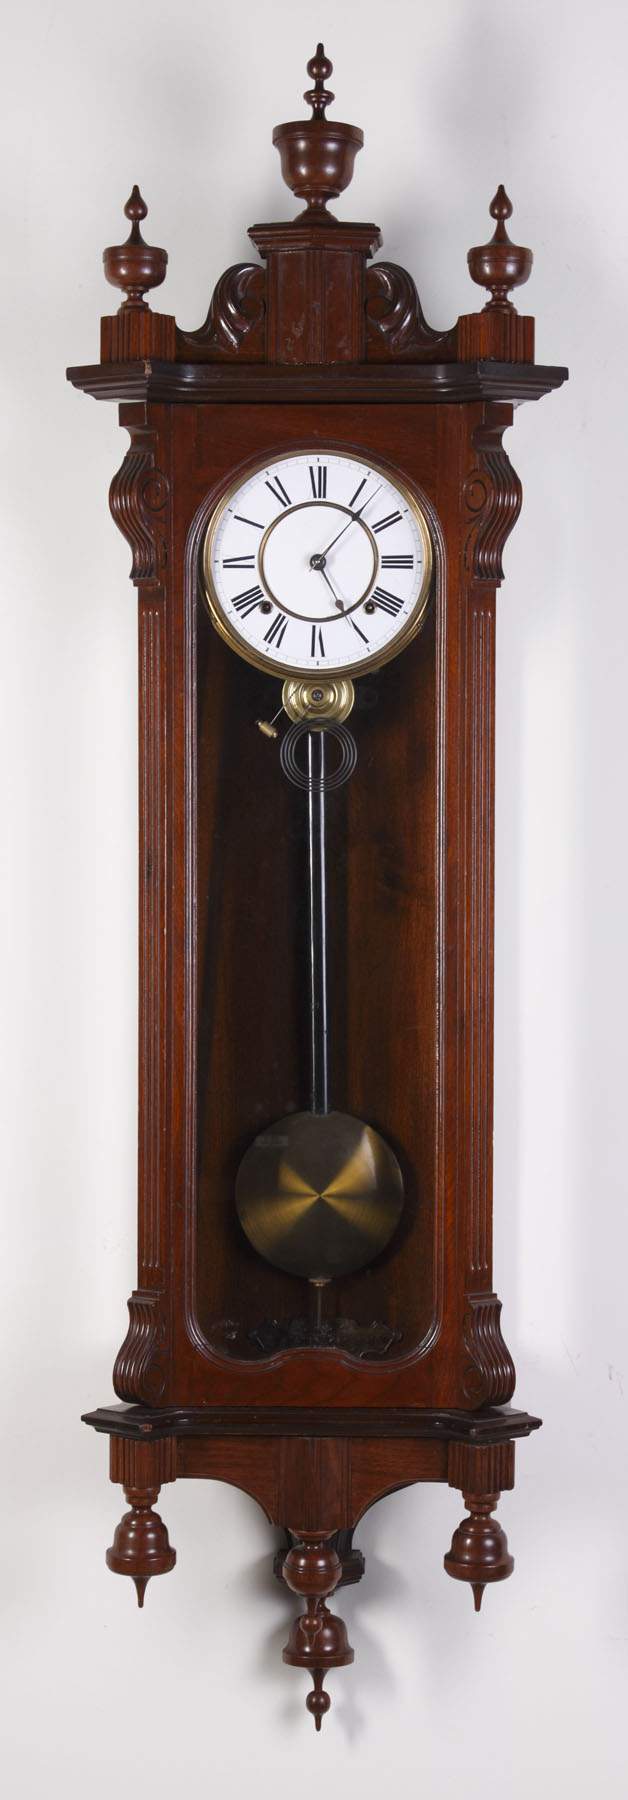 Ansonia Antique Hanging Wall Clock Cottone Auctions